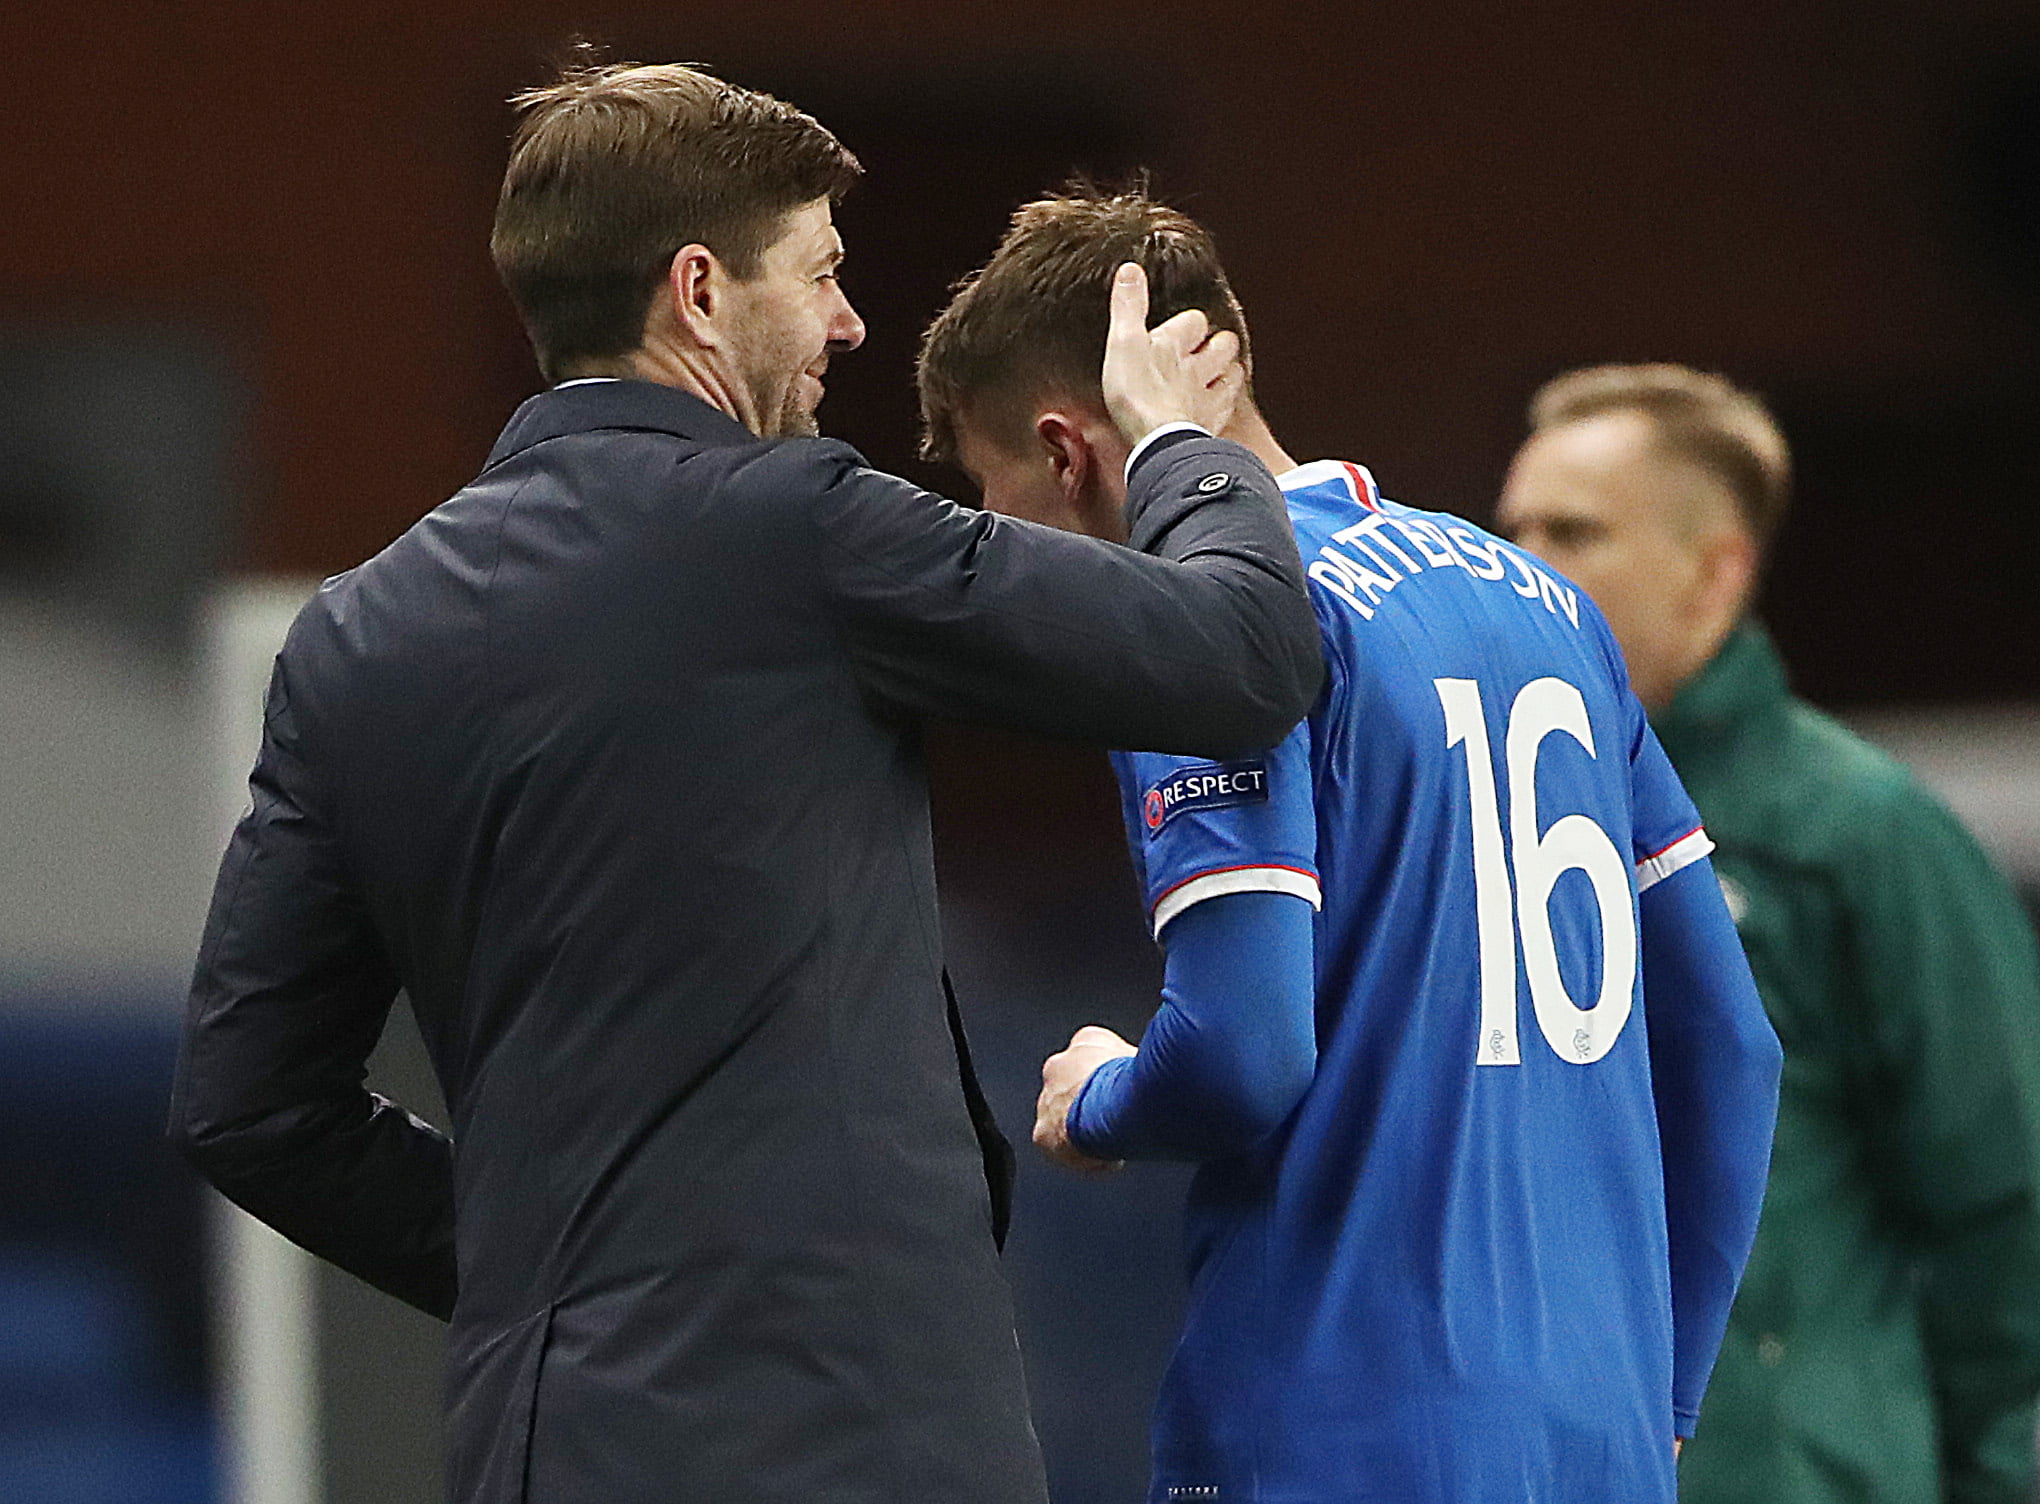 GLASGOW, SCOTLAND - FEBRUARY 25: Rangers Manager Steven Gerrard is seen with Nathan Patterson during the UEFA Europa League Round of 32 match between Rangers FC and Royal Antwerp FC at  on February 25, 2021 in Glasgow, Scotland. Sporting stadiums around the UK remain under strict restrictions due to the Coronavirus Pandemic as Government social distancing laws prohibit fans inside venues resulting in games being played behind closed doors. (Photo by Ian MacNicol/Getty Images)